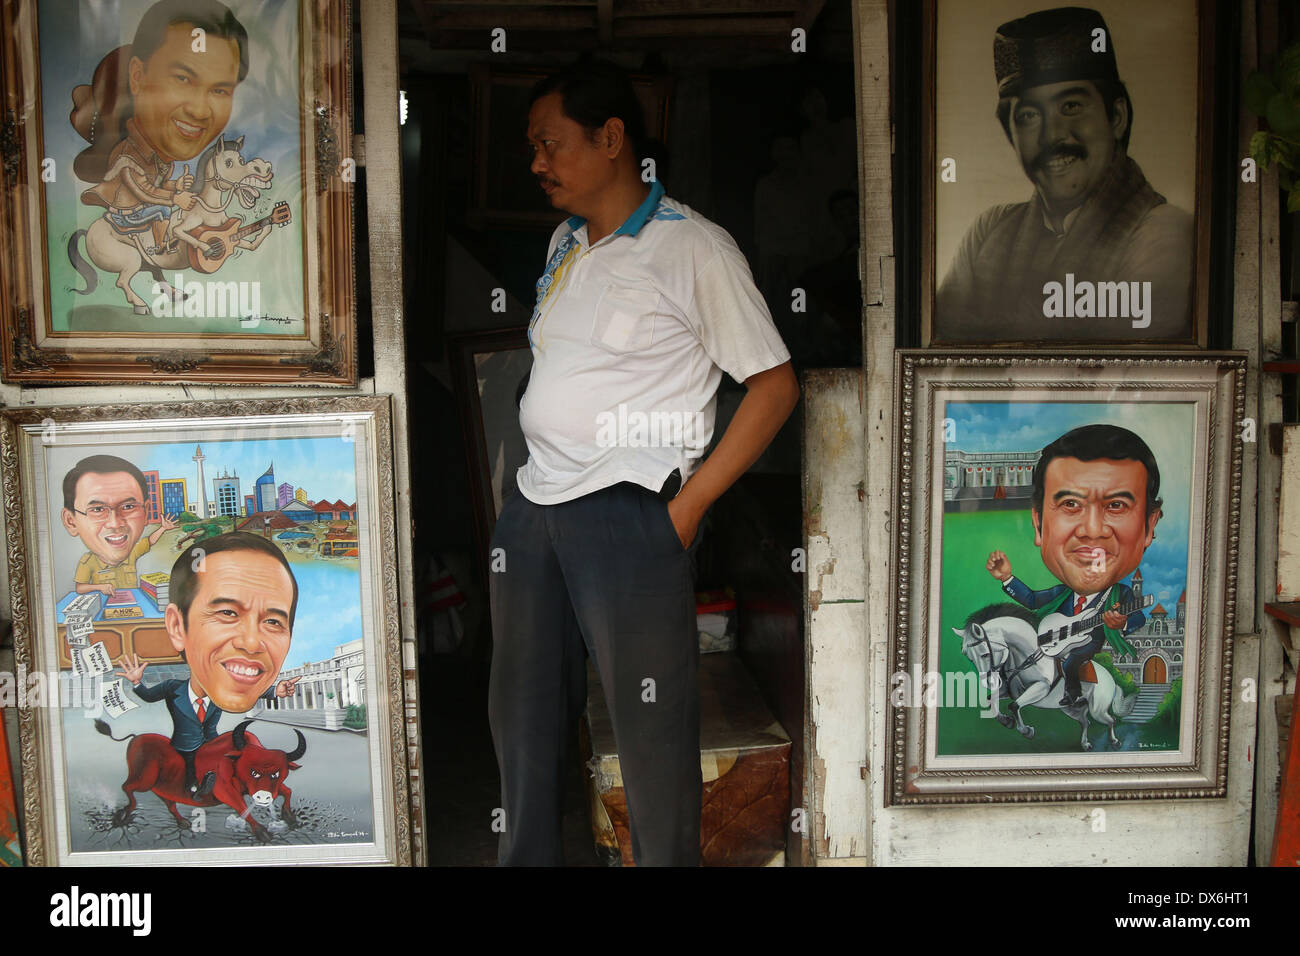 Jakarta, DKI Jakarta, Indonesia. 19th Mar, 2014. An artist painter stands near display of a painting of Jakarta Governor Joko Widodo( Left Below) and A Dangdut Musician, Rhoma Irama (Right Below) at Street Painting Shop Vendor in Jakarta. March 19, 2014 . Joko Widodo who is running for president for the Indonesian Democratic Party of Struggle (PDI-P) and Rhoma Irama a president candidate for National Awakening Party (PKB). Stock Photo